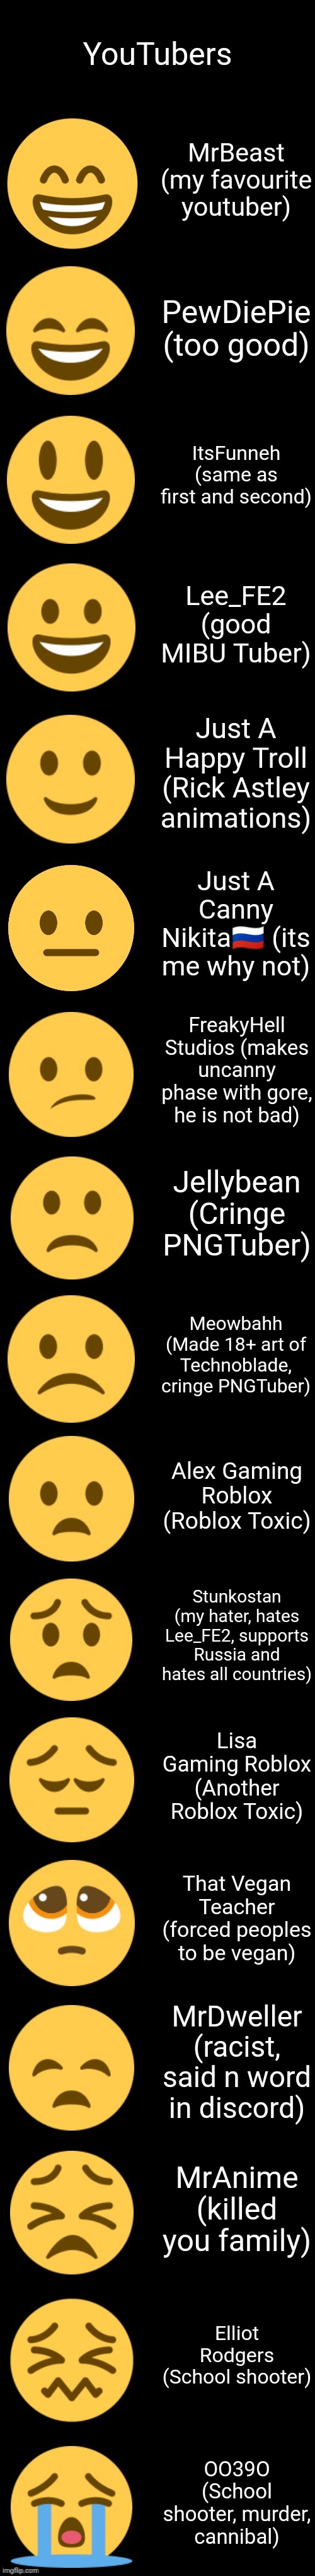 Emoji becoming sad (POV: YouTubers) | YouTubers; MrBeast (my favourite youtuber); PewDiePie (too good); ItsFunneh (same as first and second); Lee_FE2 (good MIBU Tuber); Just A Happy Troll (Rick Astley animations); Just A Canny Nikita🇷🇺 (its me why not); FreakyHell Studios (makes uncanny phase with gore, he is not bad); Jellybean (Cringe PNGTuber); Meowbahh (Made 18+ art of Technoblade, cringe PNGTuber); Alex Gaming Roblox (Roblox Toxic); Stunkostan (my hater, hates Lee_FE2, supports Russia and hates all countries); Lisa Gaming Roblox (Another Roblox Toxic); That Vegan Teacher (forced peoples to be vegan); MrDweller (racist, said n word in discord); MrAnime (killed you family); Elliot Rodgers (School shooter); OO39O (School shooter, murder, cannibal) | image tagged in emoji becoming sad extended | made w/ Imgflip meme maker